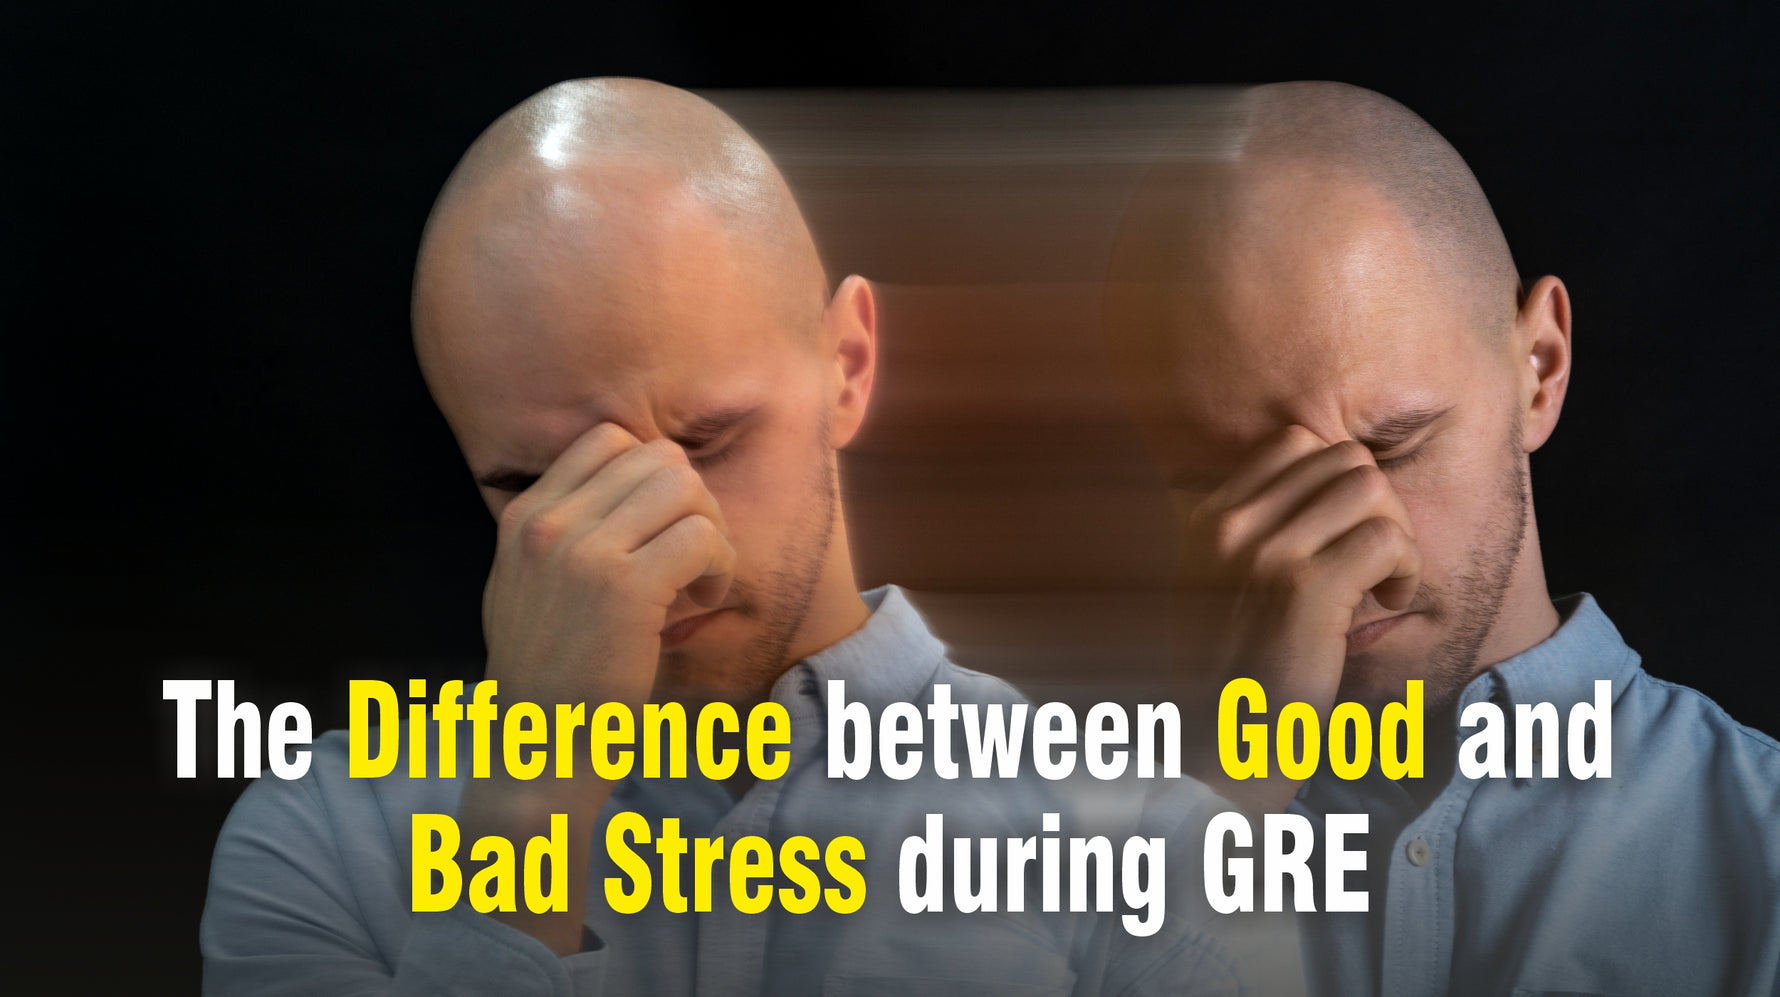 The Difference between Good and Bad Stress during GRE